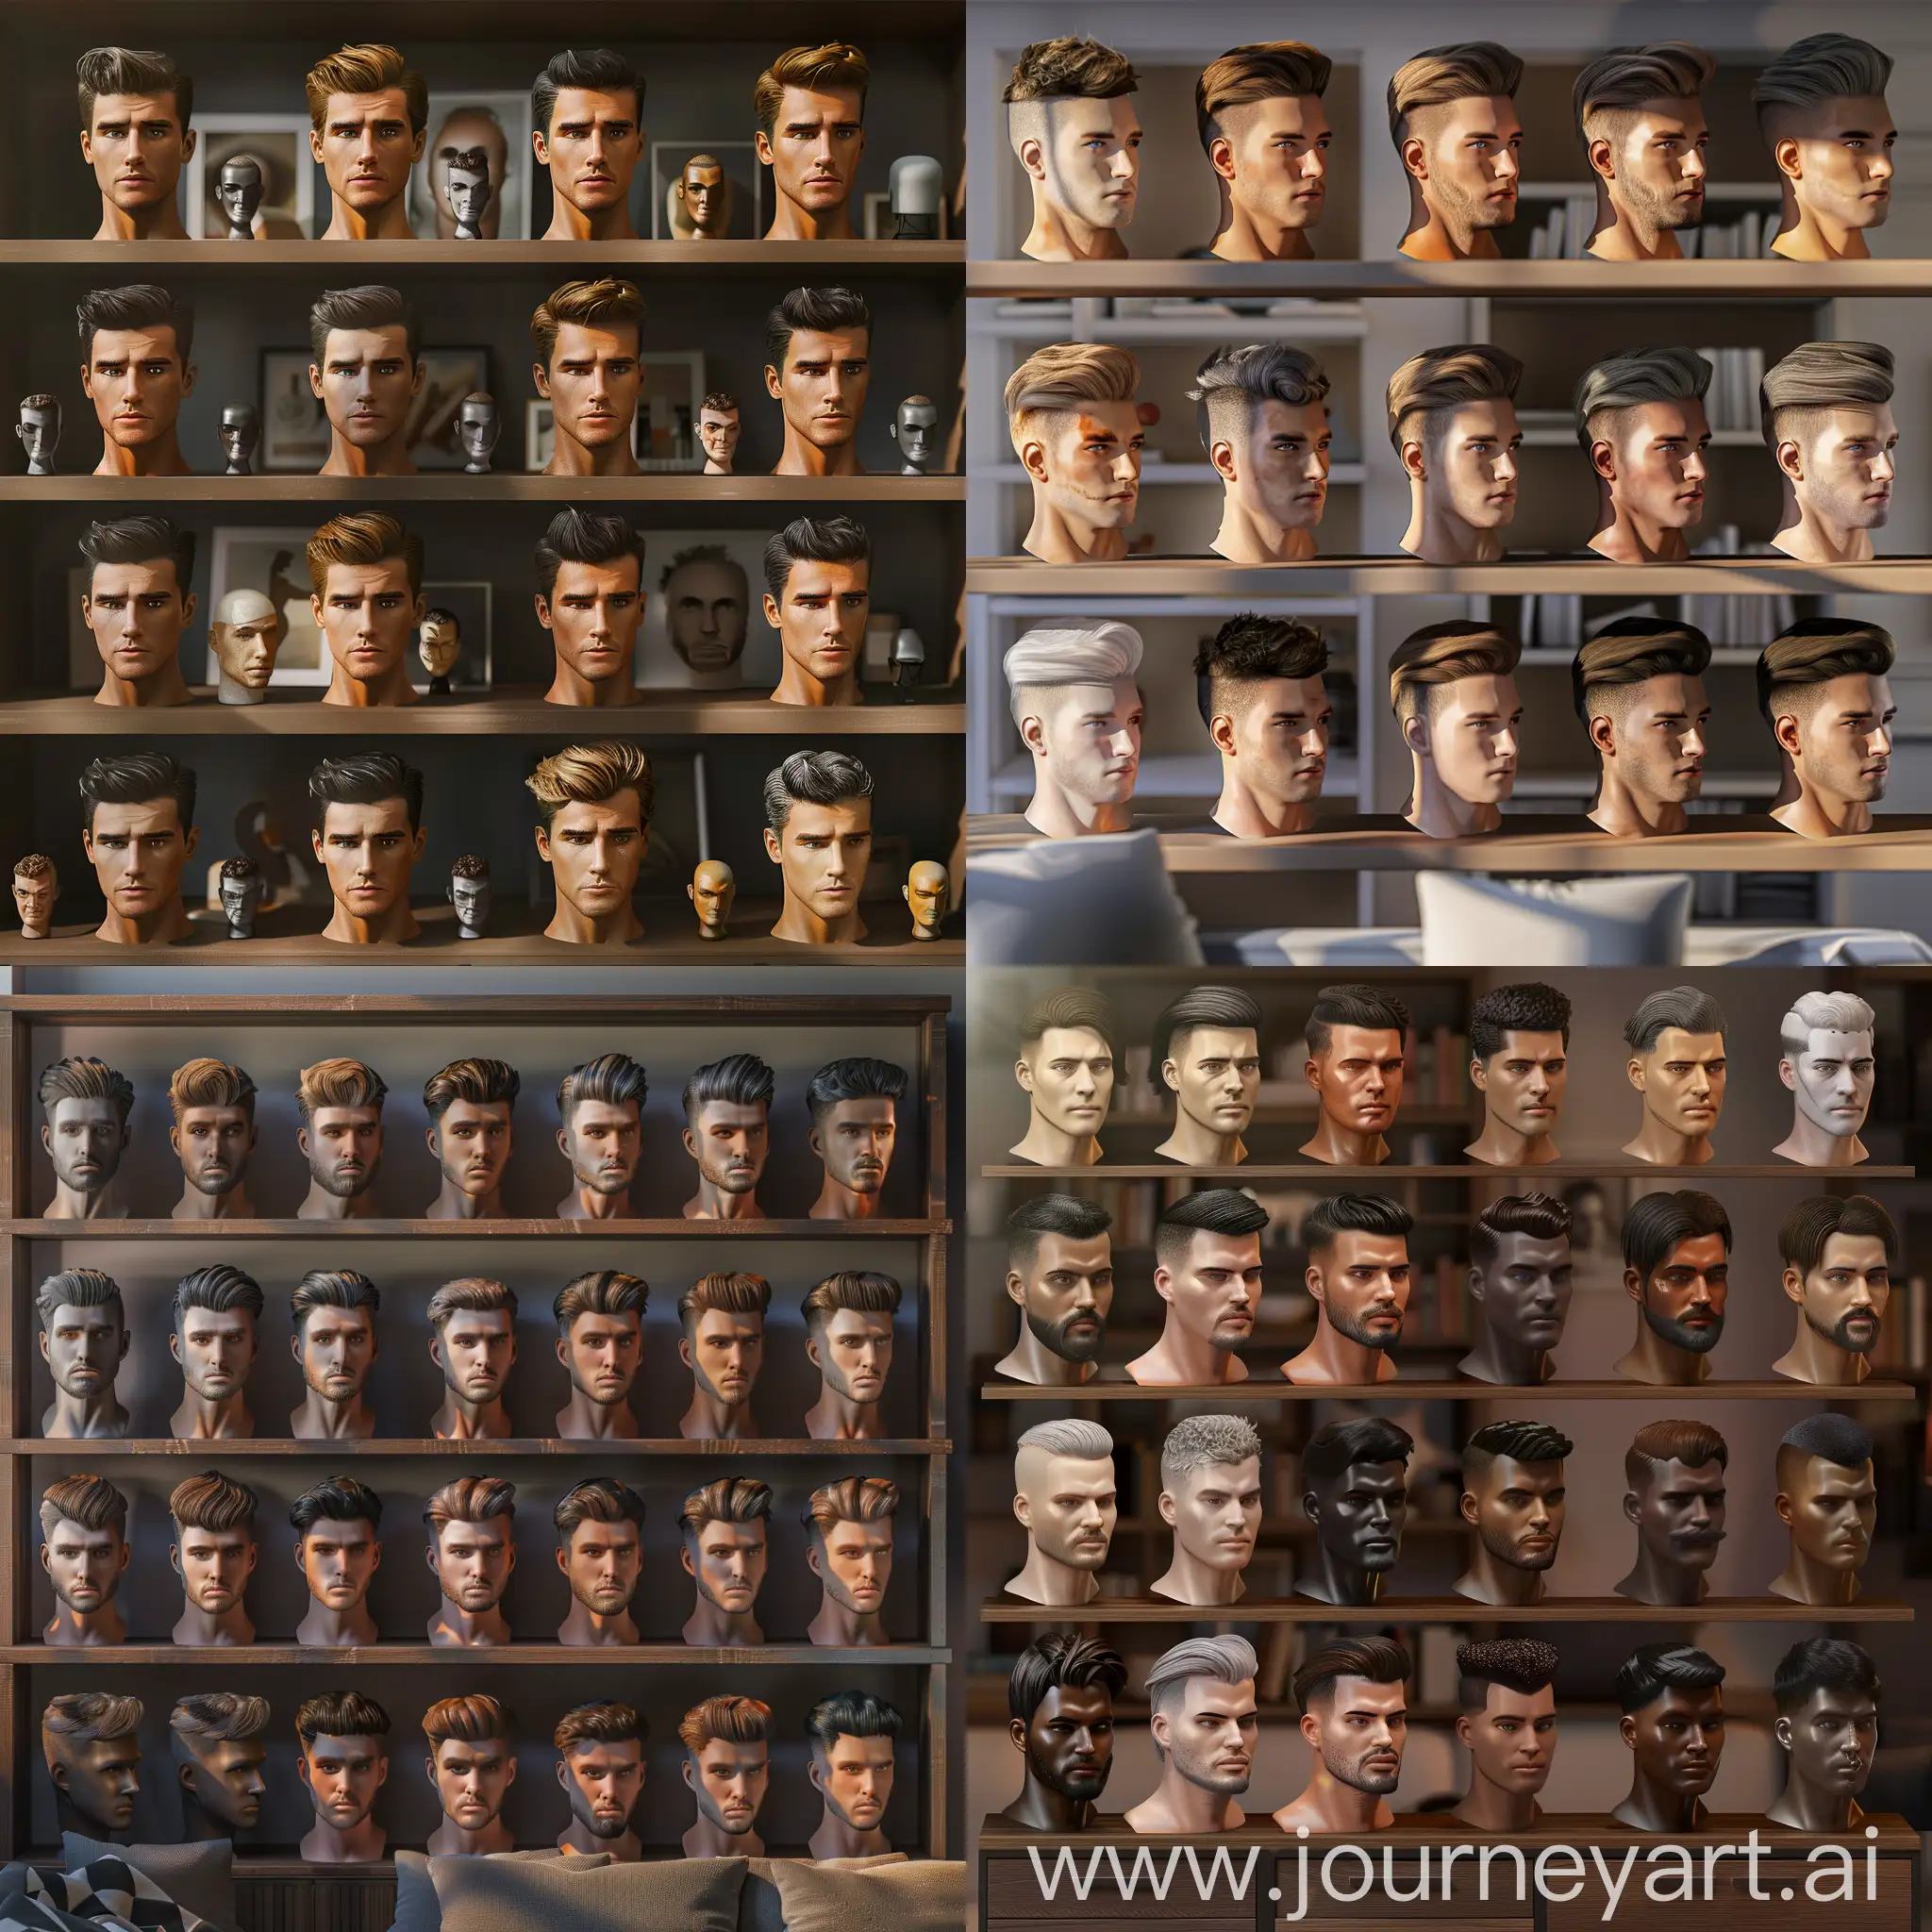 A realistic collection of detached handsome male heads, detached real male heads, good looking male heads on shelves, realistic prototype male heads from different ethnicities and different hairtyles, living room background, daylight living room background